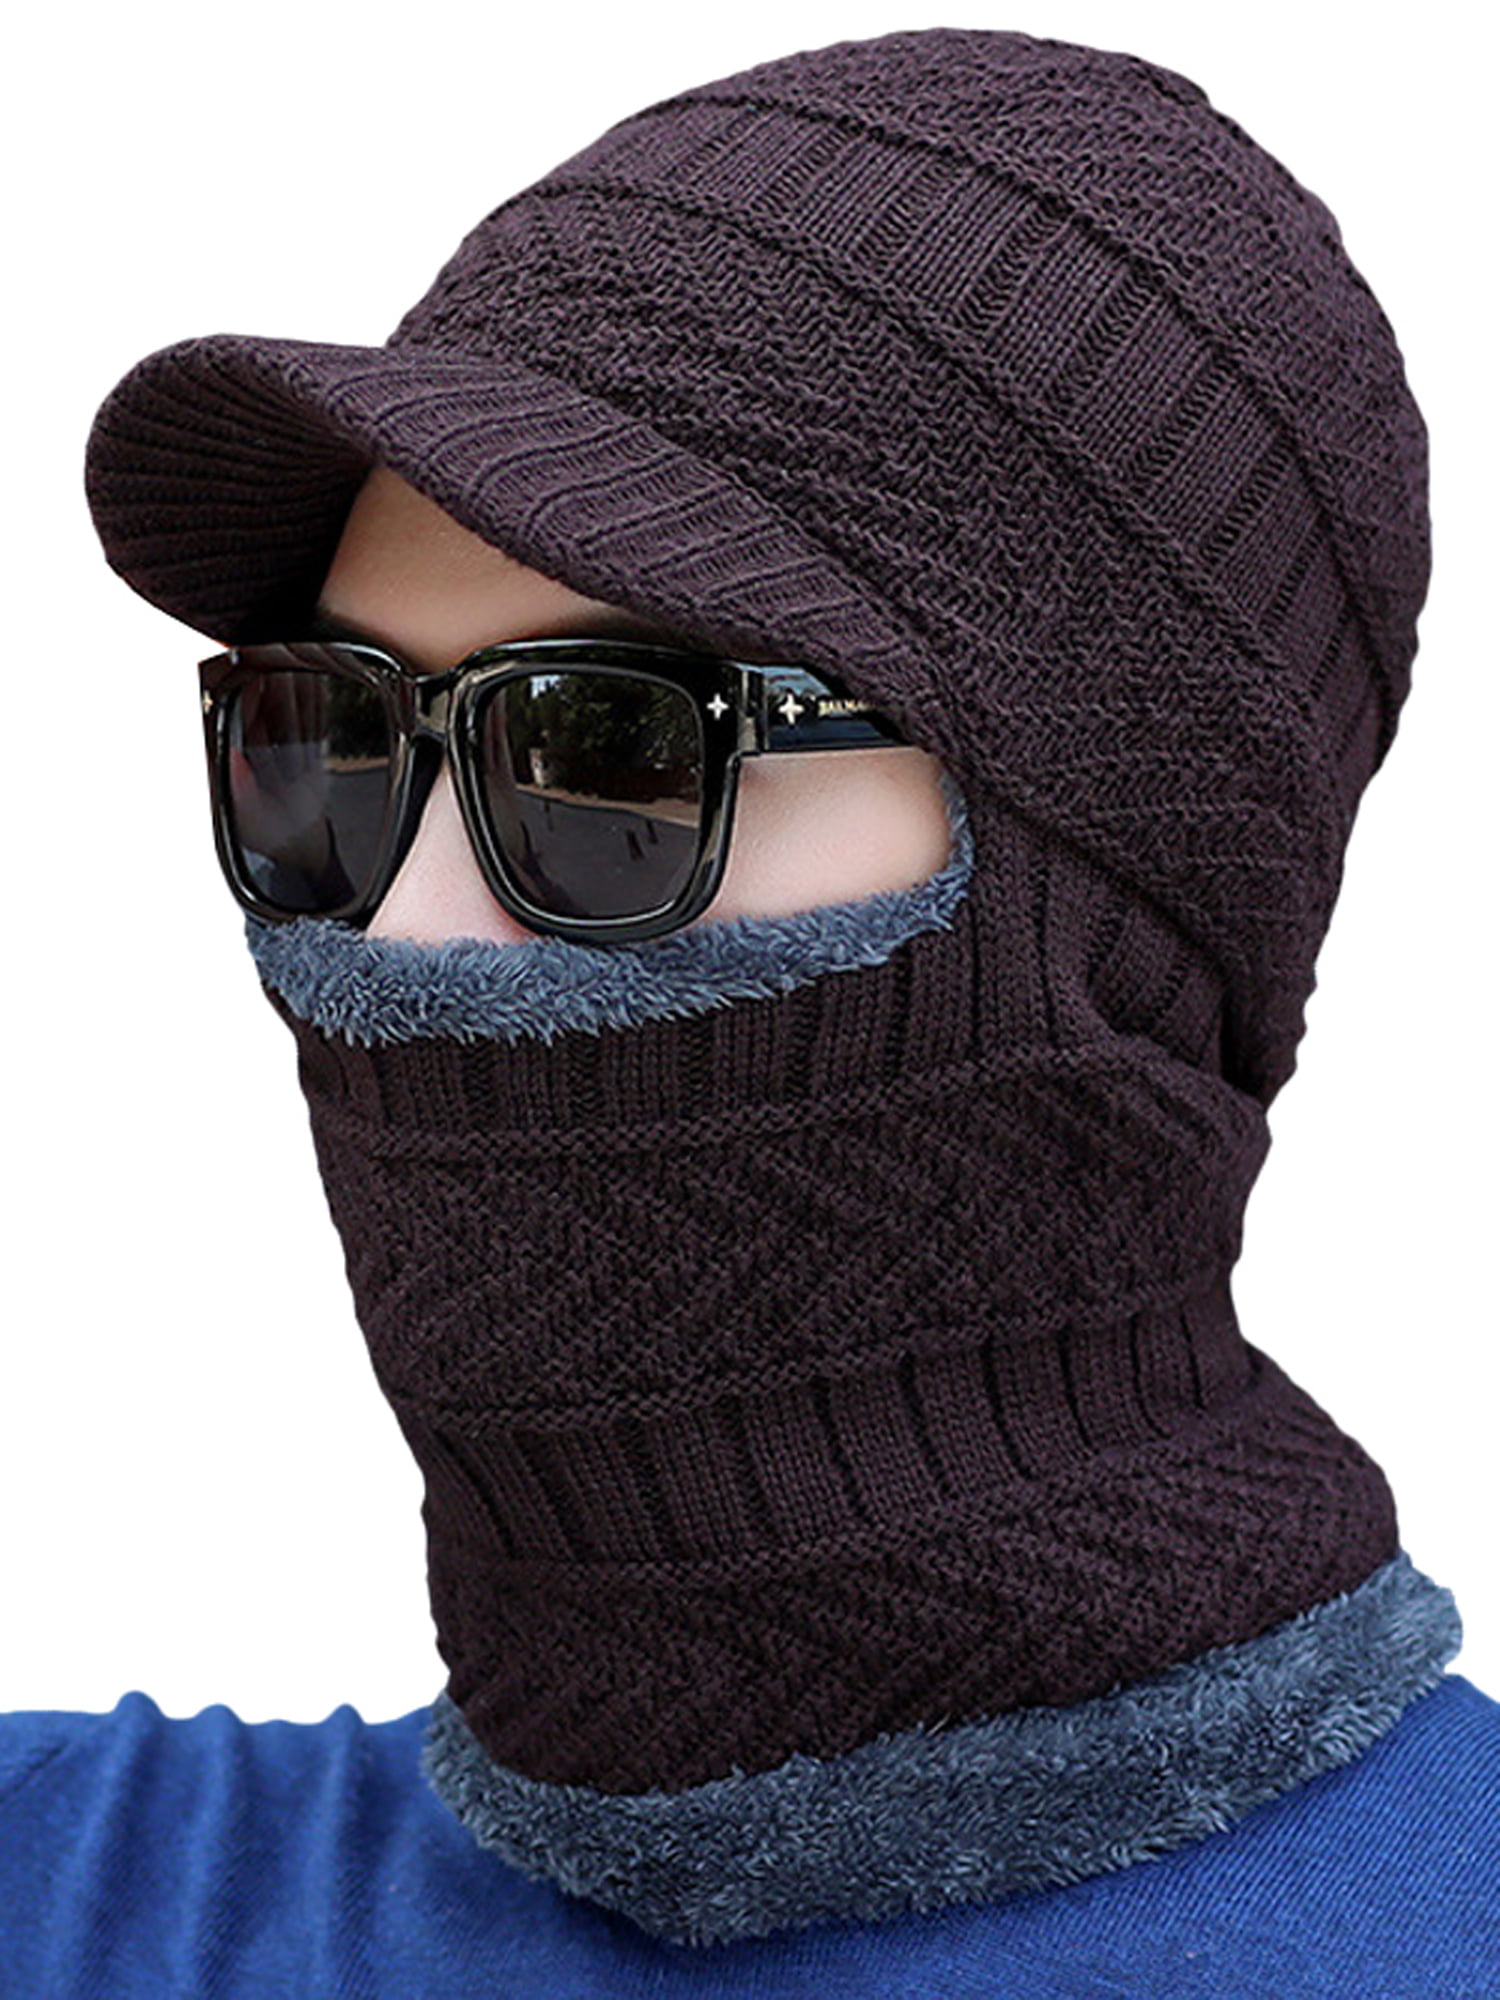 Unisex Thermal Snood Neck Scarf Ski Winter Beanie Hat Warm Face Cover Balaclava 